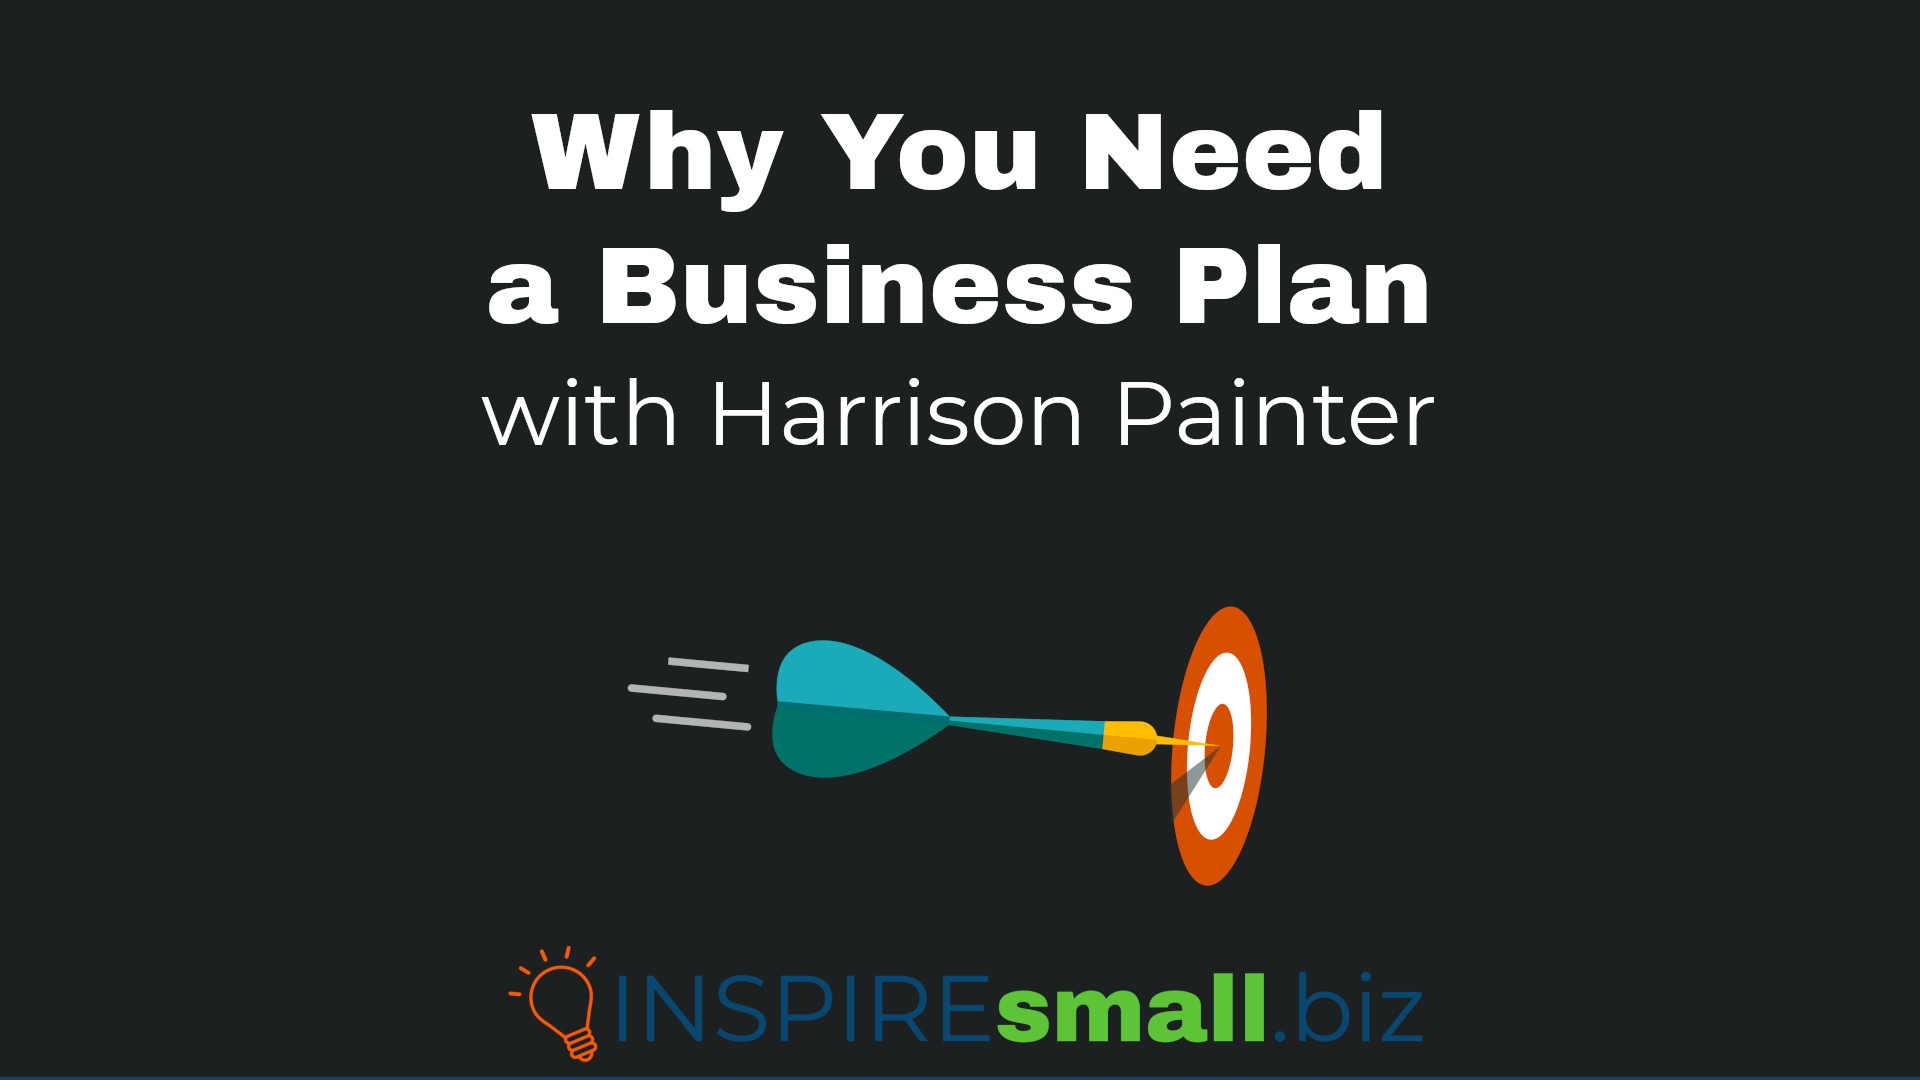 Why You Need a Business Plan with Harrison Painter from Amplify EQ, hosted by INSPIREsmall.biz